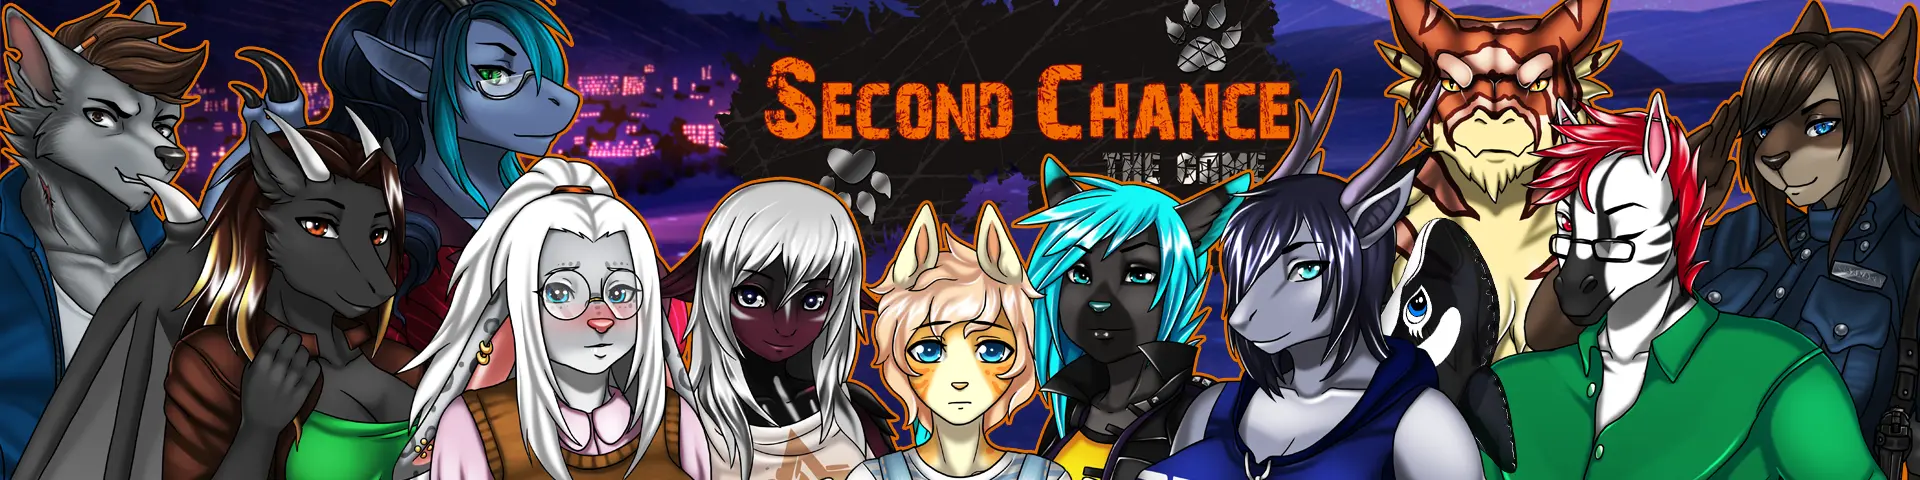 Second Chance [v0.04.0.0] main image